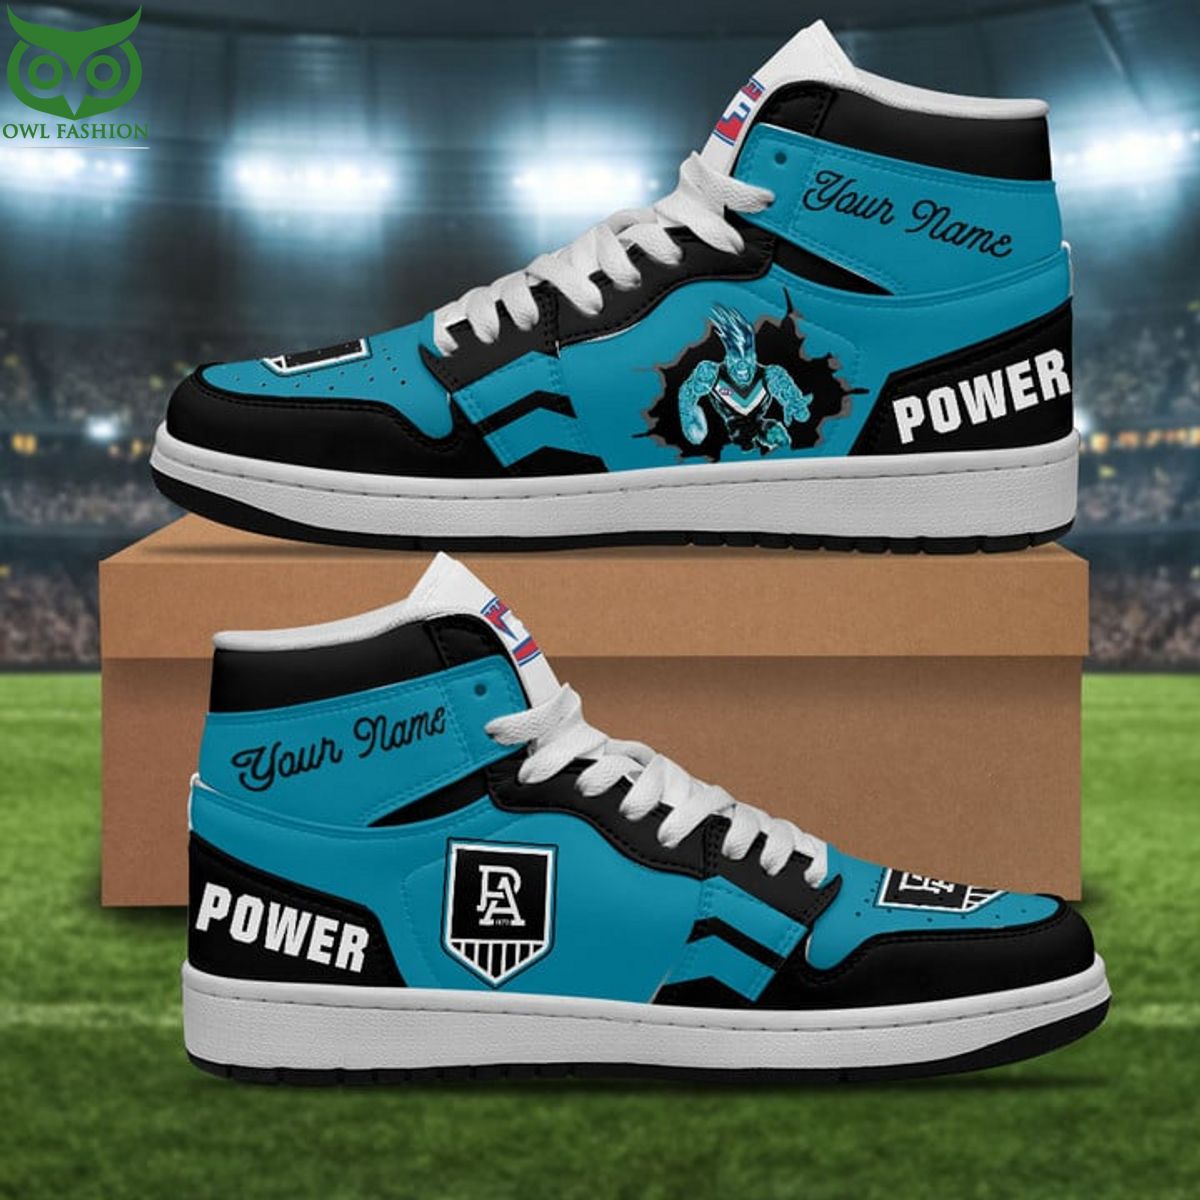 New 2023 AFL Port Adelaide Limited Edition Air Jordan 1 Stand easy bro